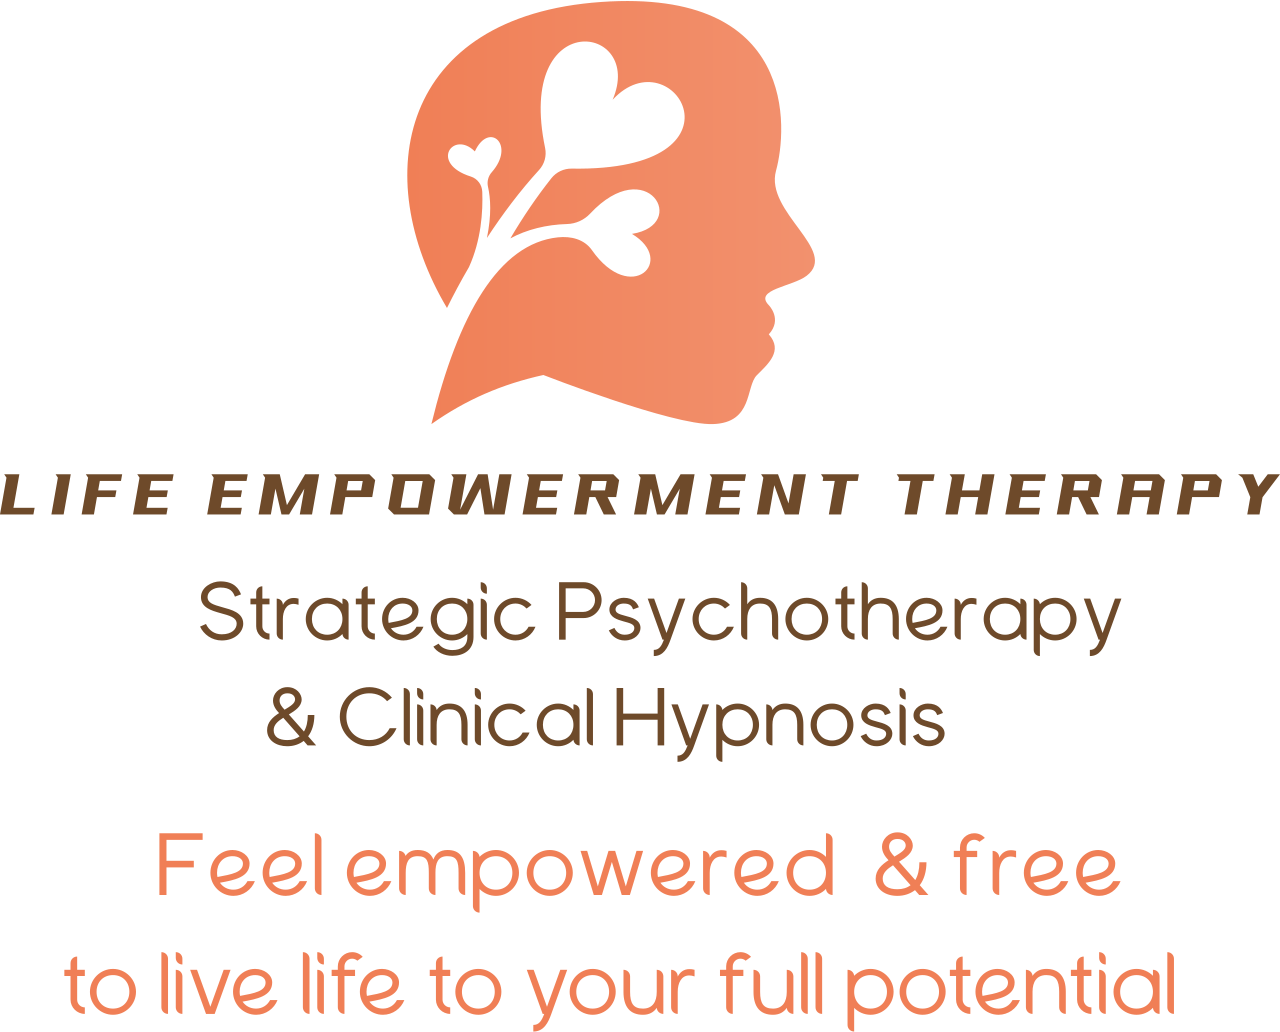 Hypnotherapy (hypnosis) &  Psychotherapy for women 's logo